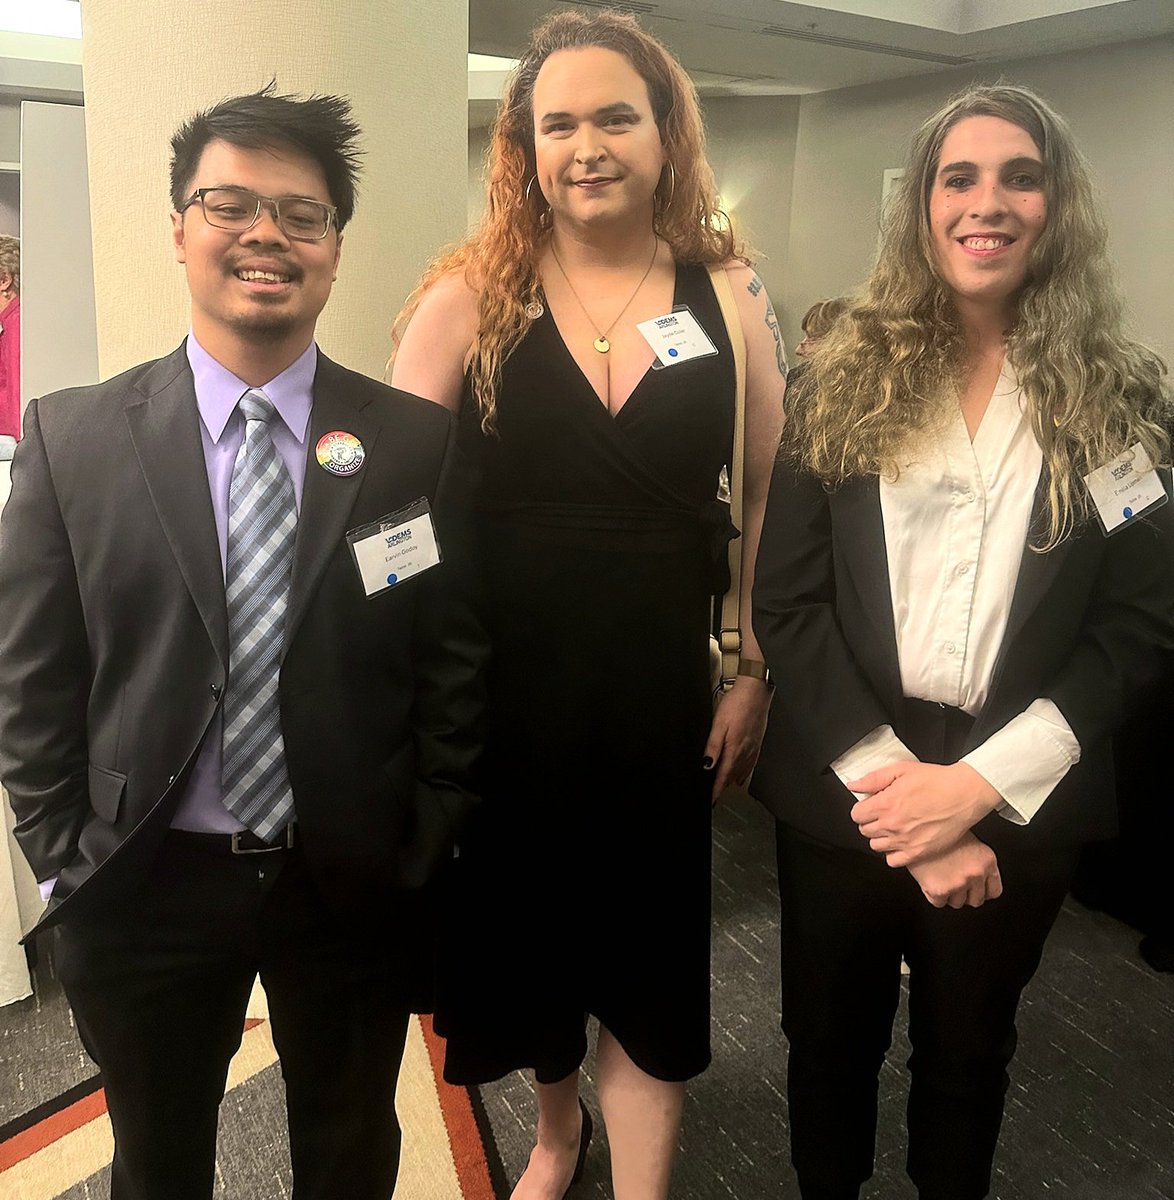 Staying active in the community @SBWorkersUnited Virginia Partners, Jayde, from Arlington Courthouse Starbucks, along with Earvin & Emilia from Gate House Starbucks in Falls Church attended the @arlingtondems 2024 #BlueVictoryDinner last night! Looking sharp! #sbwumarjb #sbwu #1u